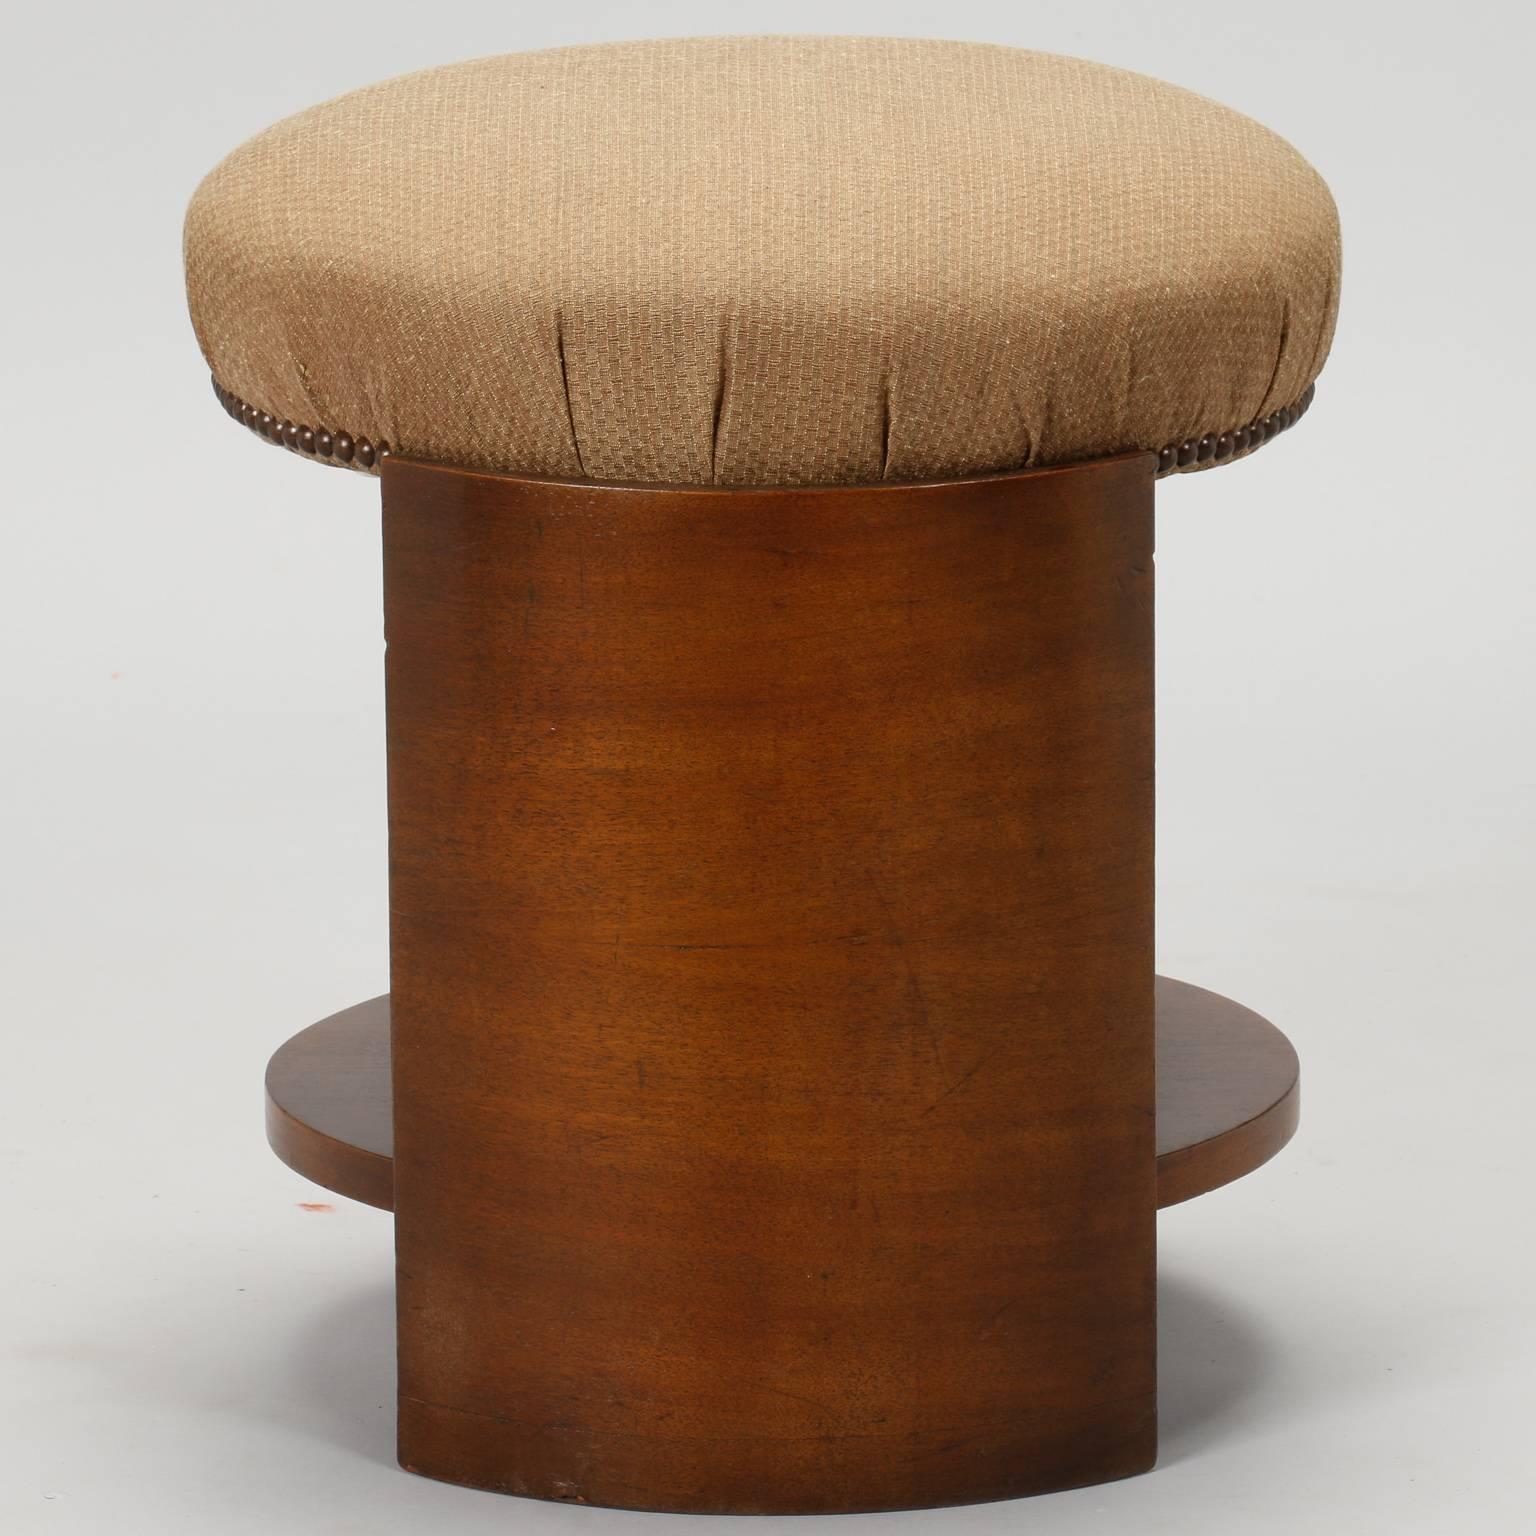 French Art Deco Round Upholstered Stool